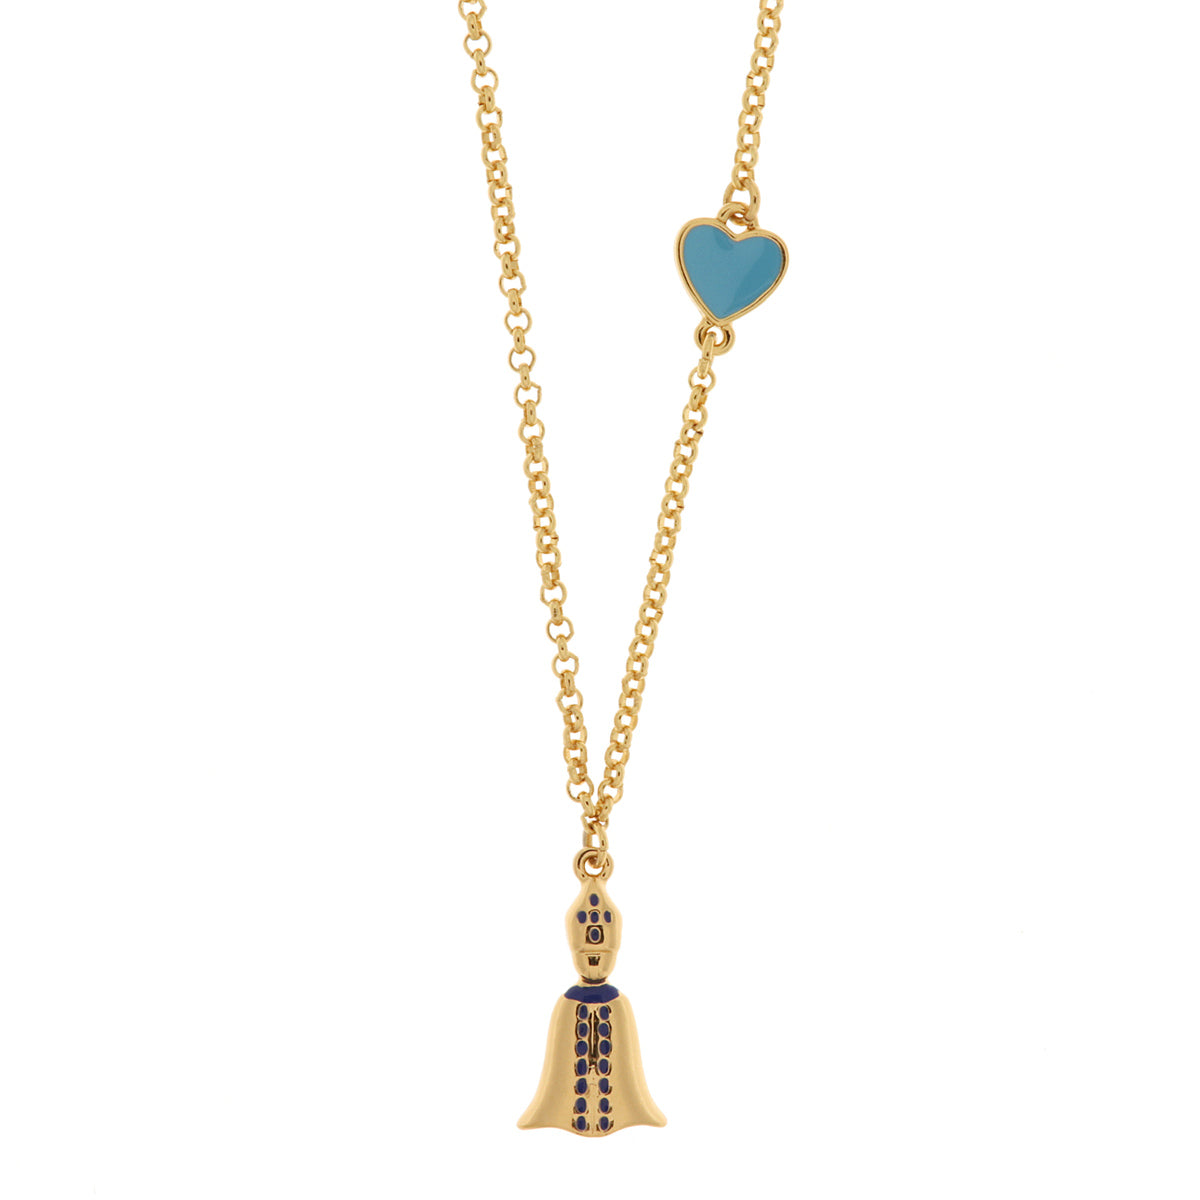 Metal necklace with San Gennaro pendant and blue heart